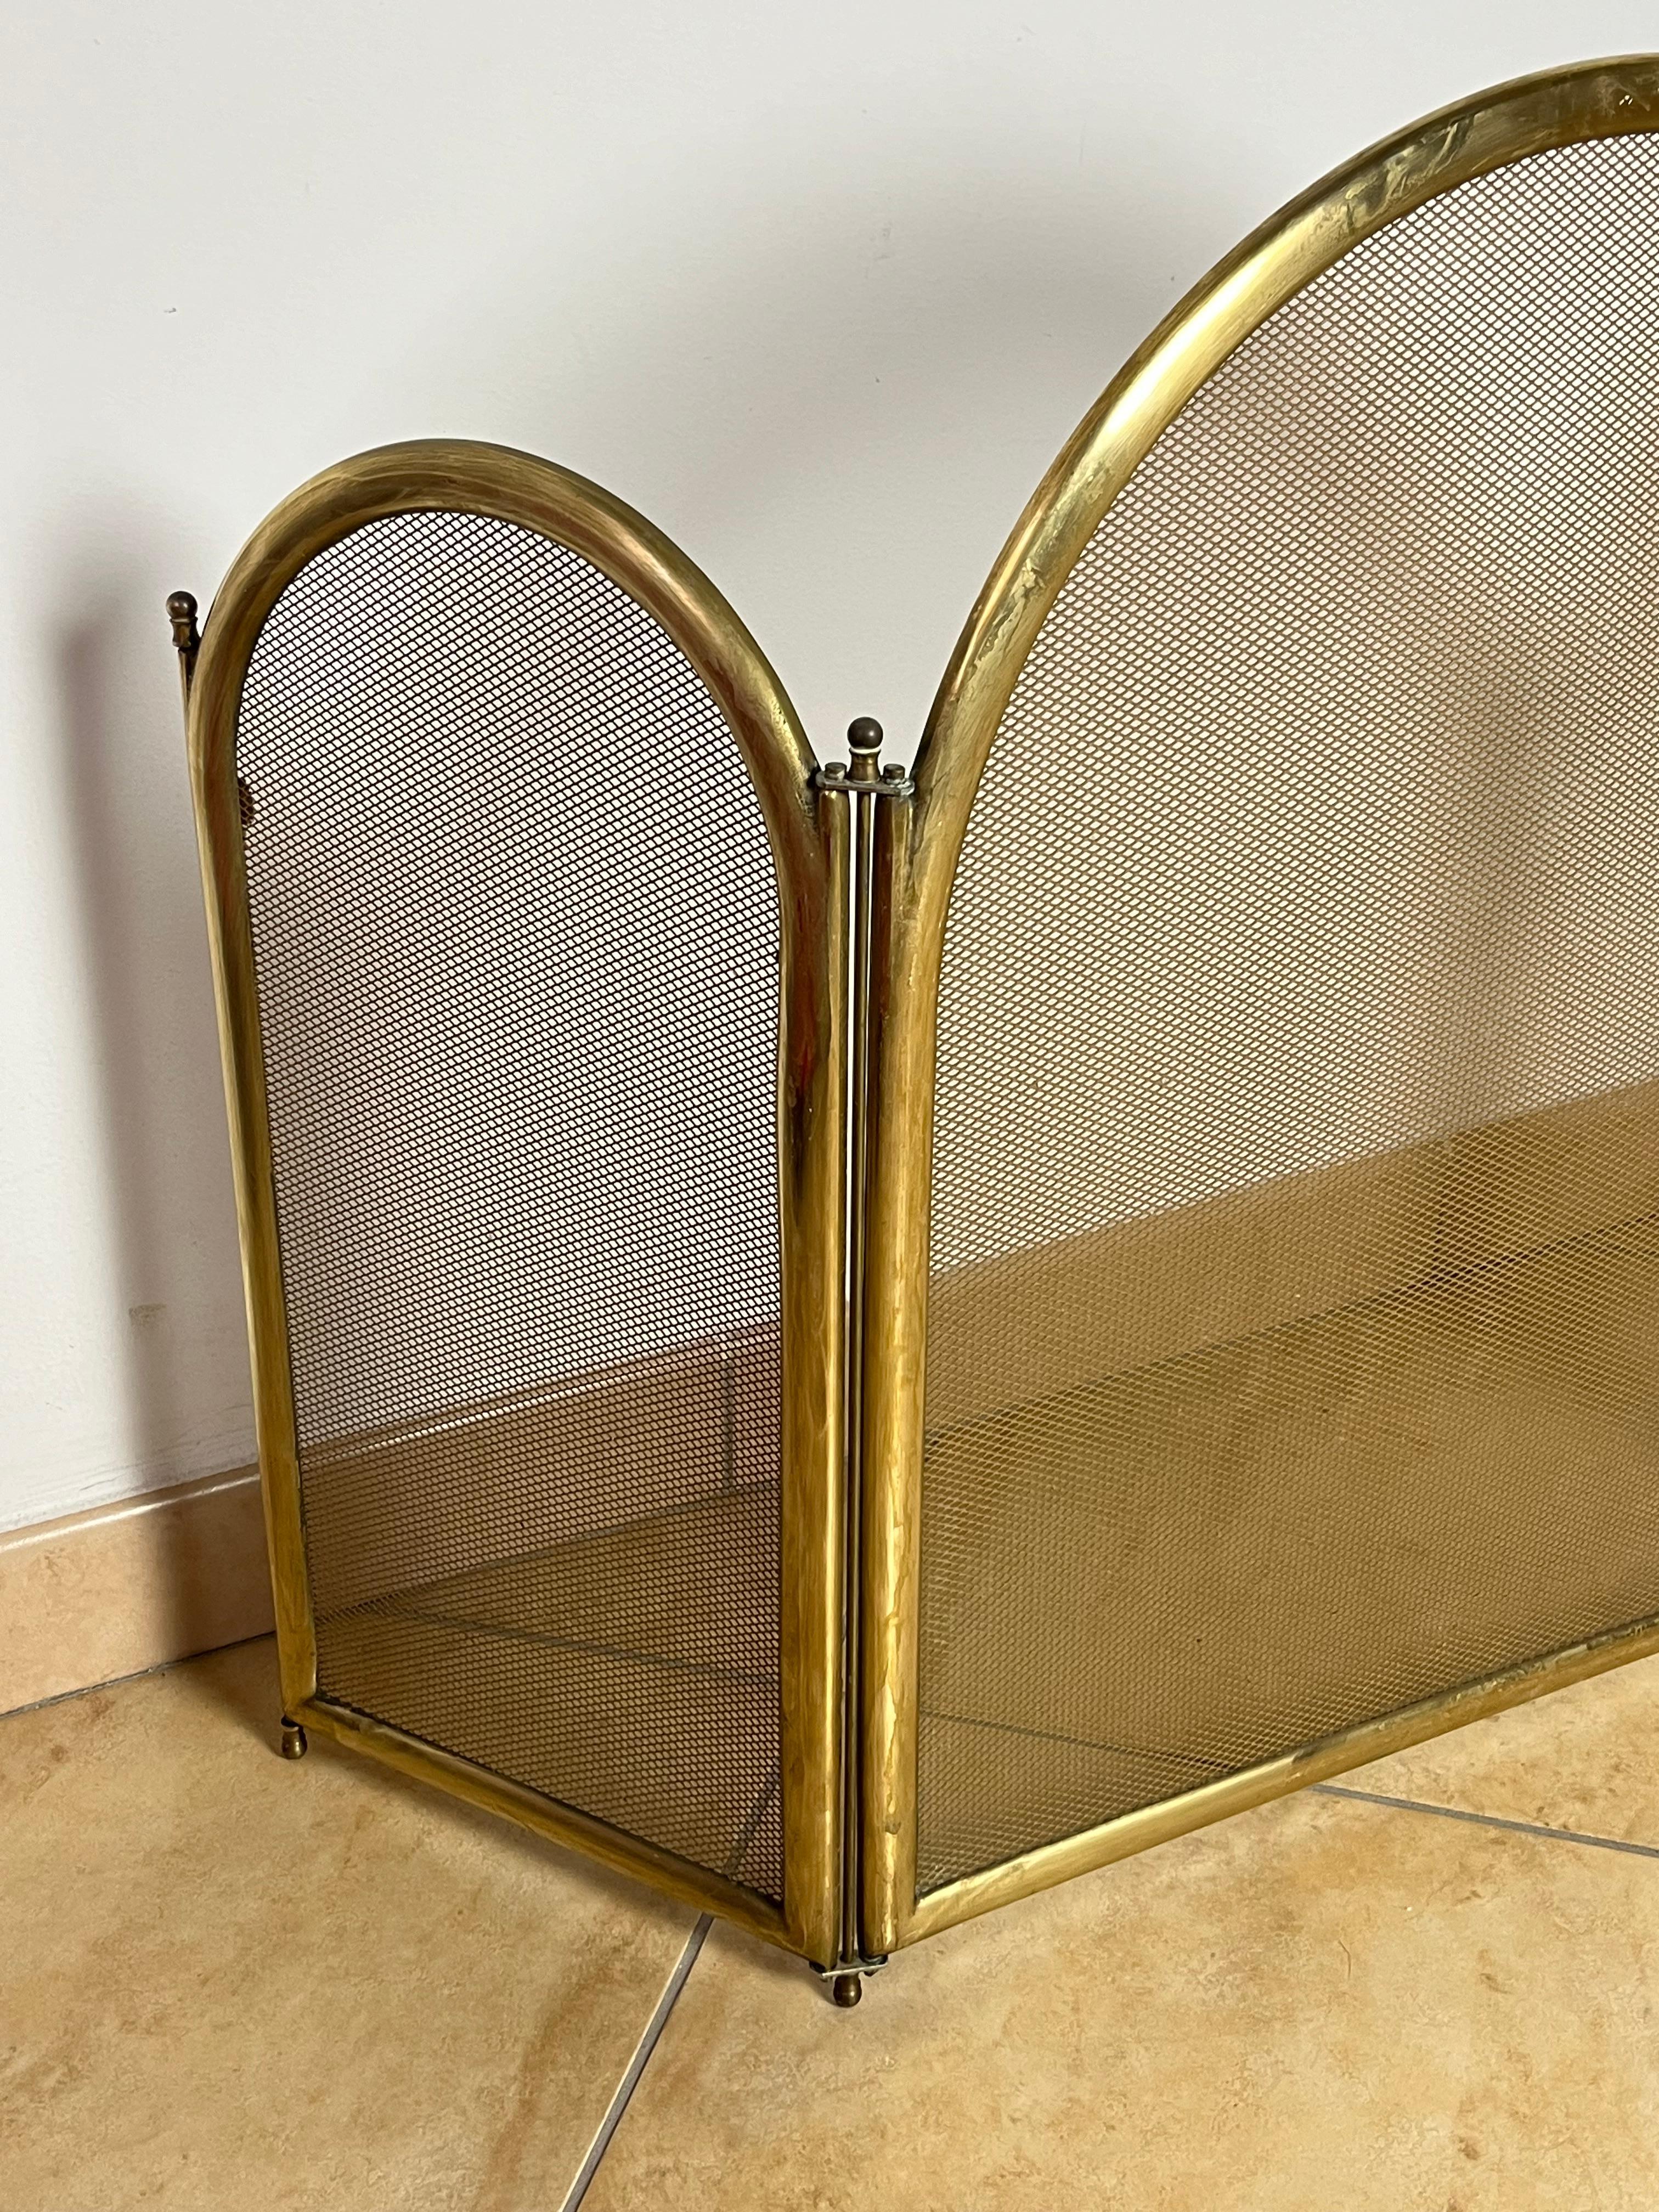 Brass spark arrester, Italy, 1970s
Found in a noble villa, it has three panels. Those on the sides can adjust their opening.
Intact and in good condition.